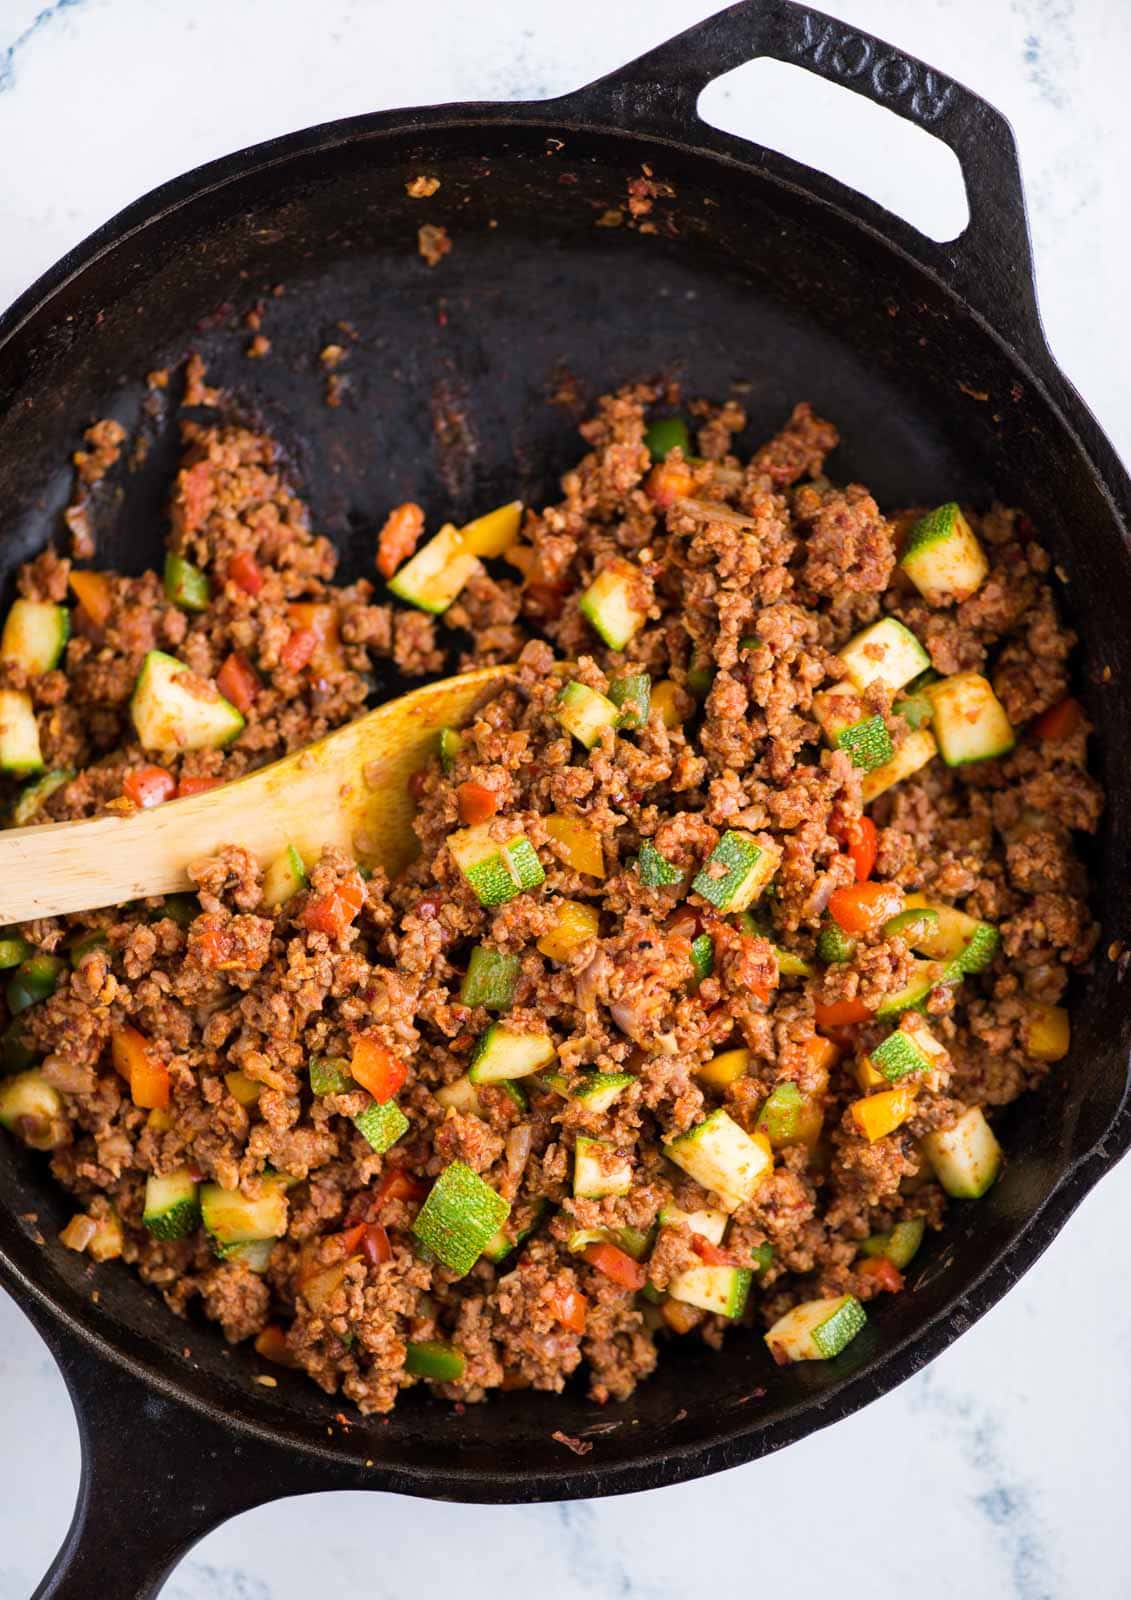 Healthy Ground Beef Vegetable Skillet Recipe | The flavours of kitchen